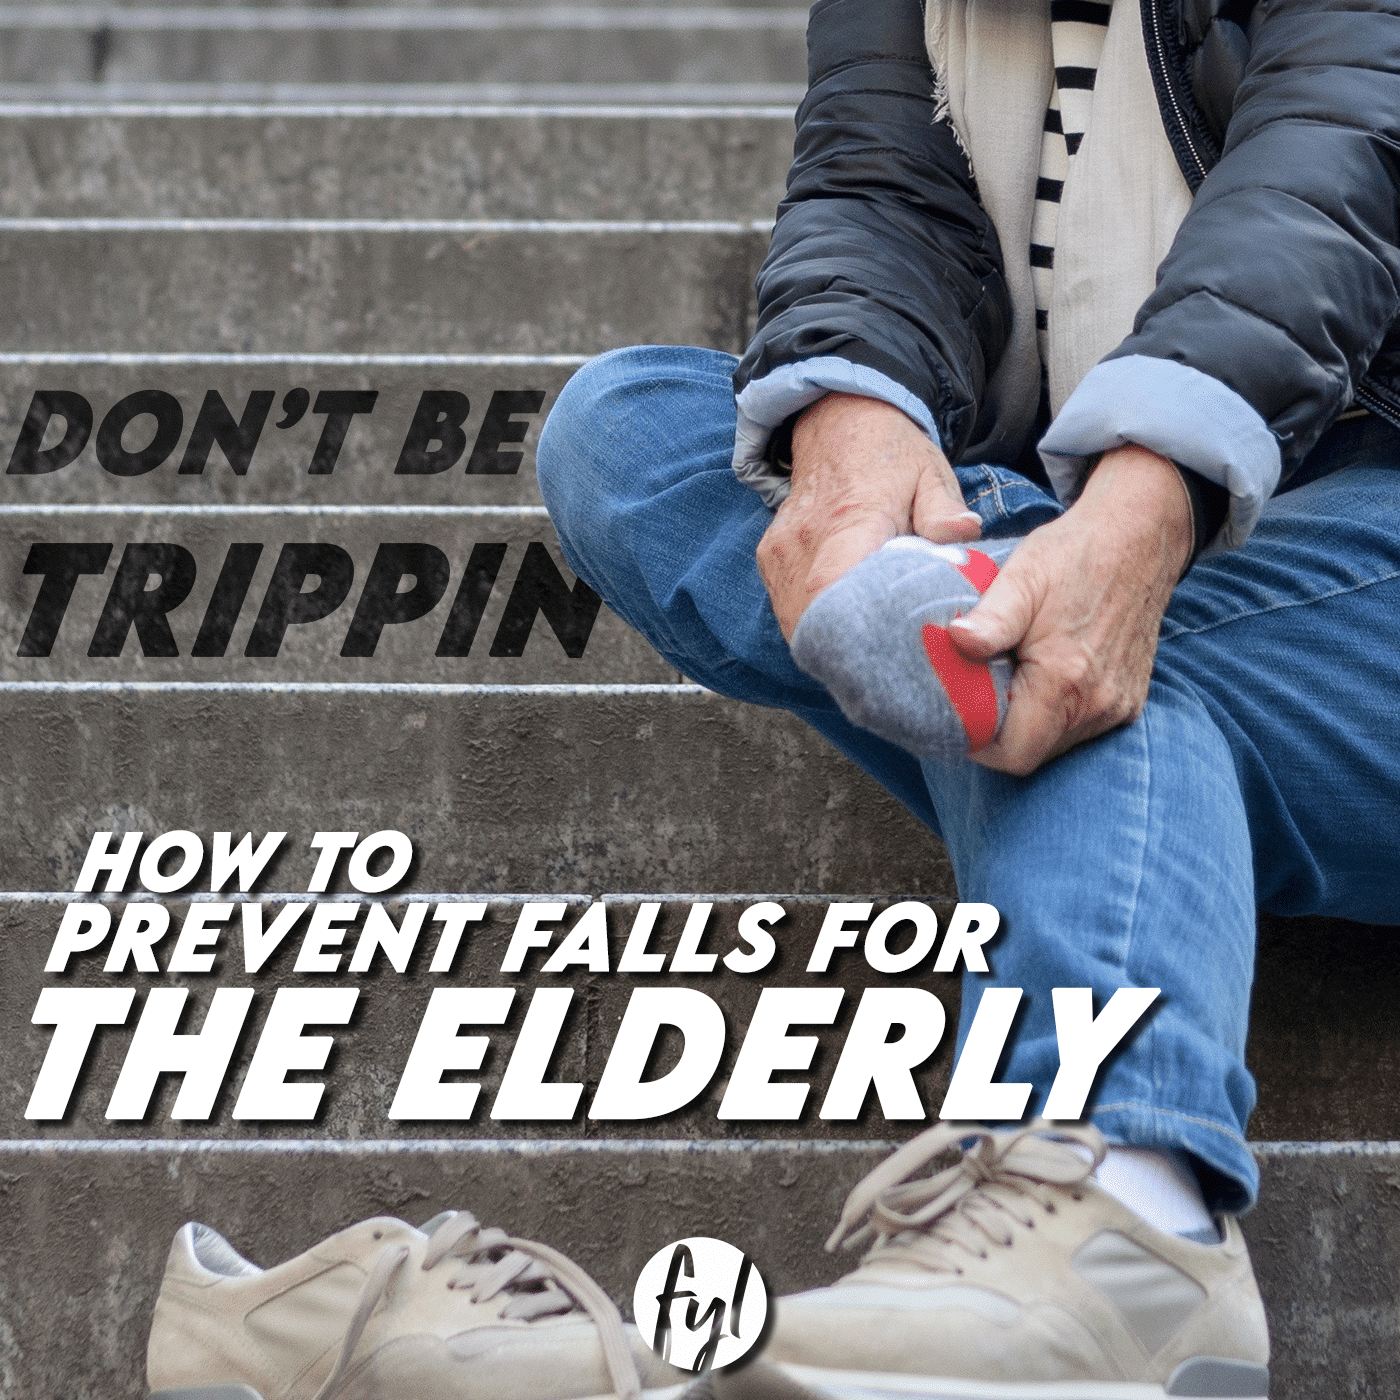 Don’t Be Trippin’: How to Prevent Falls for the Elderly